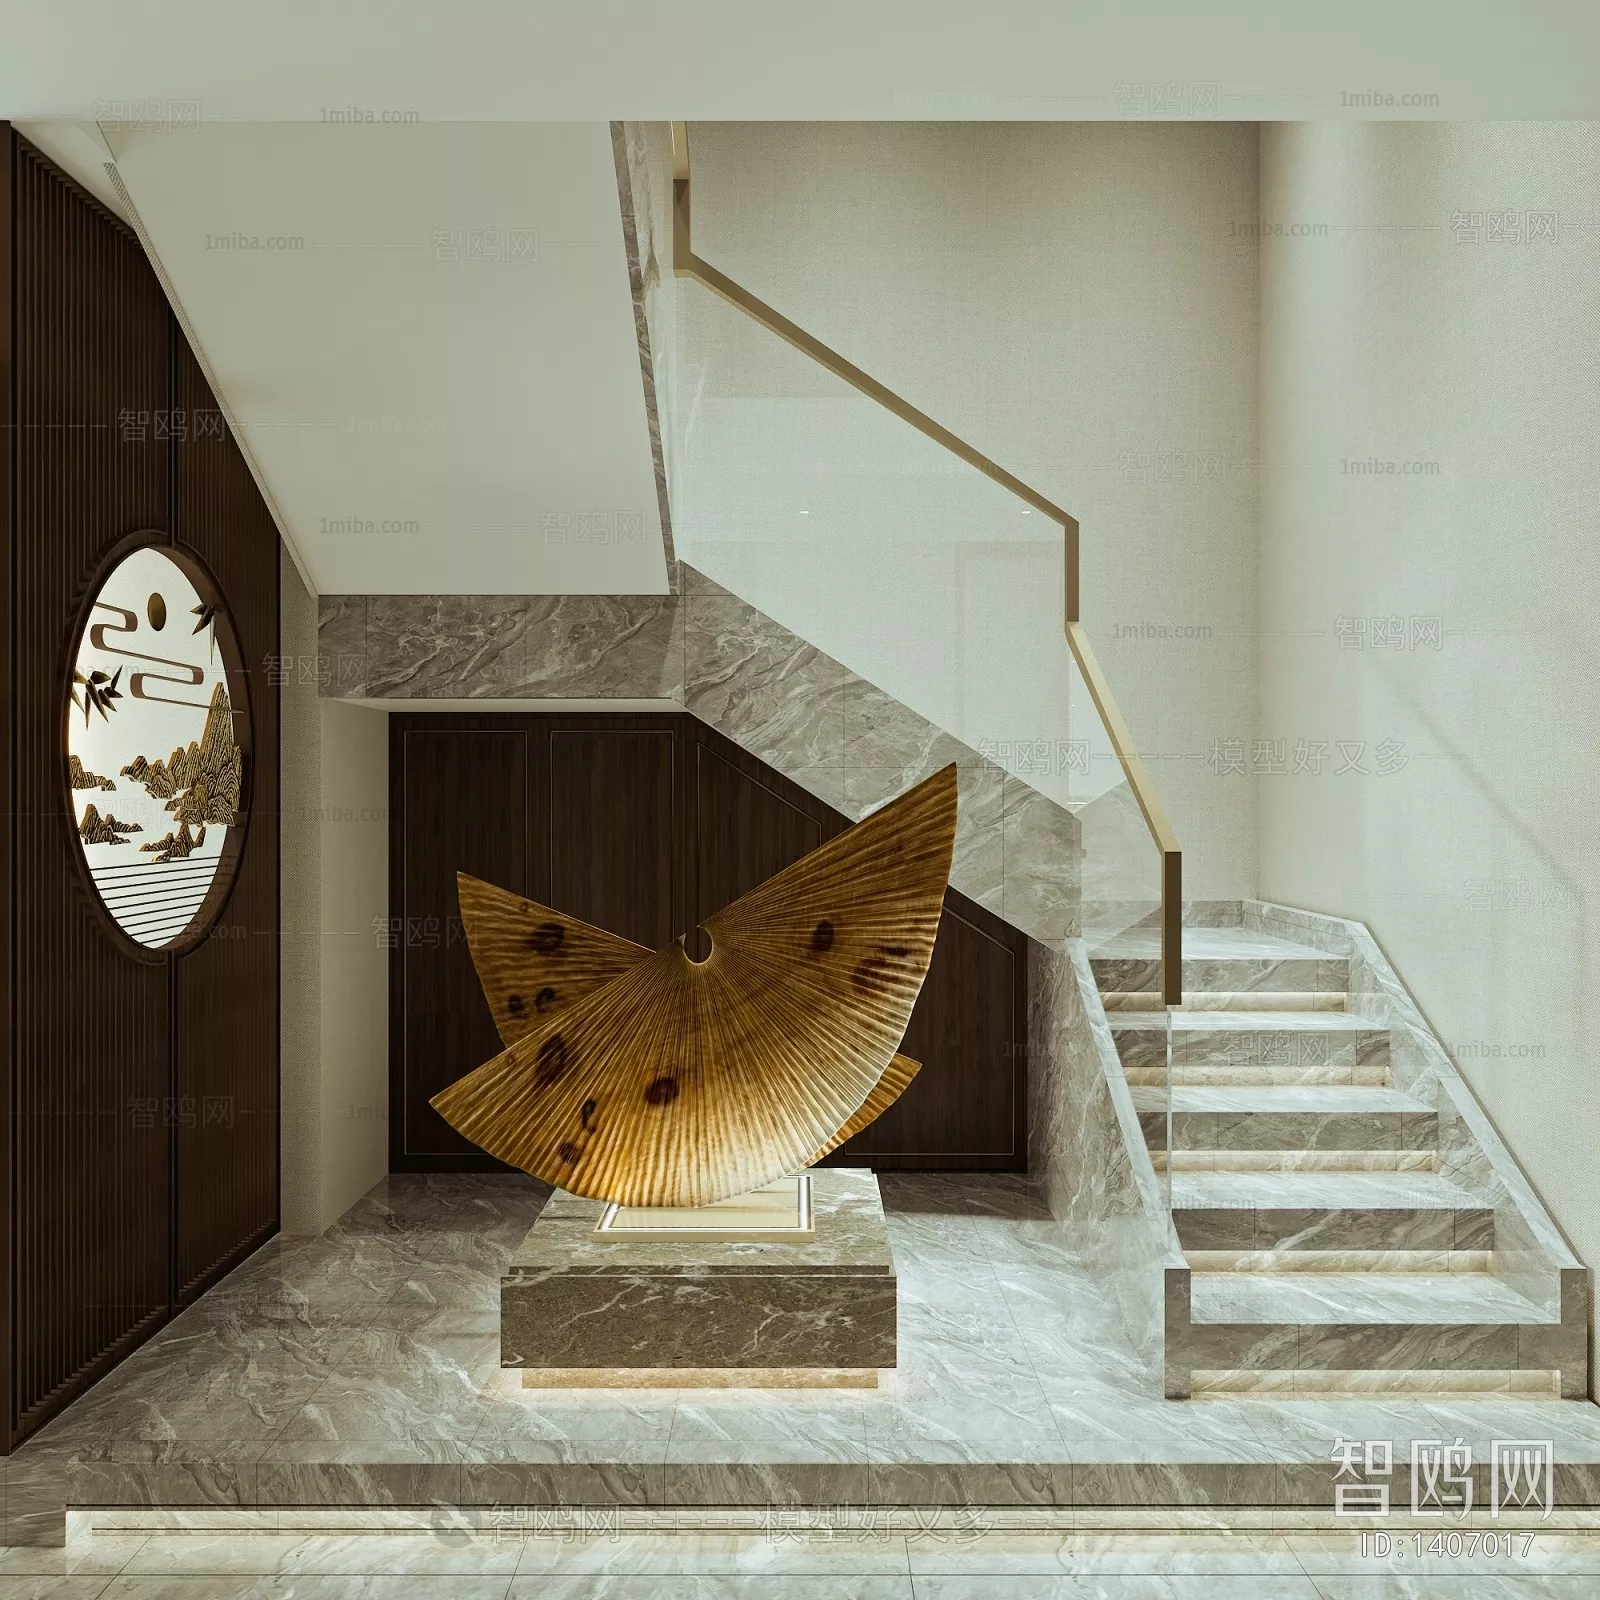 MODERN STAIR - SKETCHUP 3D MODEL - VRAY OR ENSCAPE - ID14246